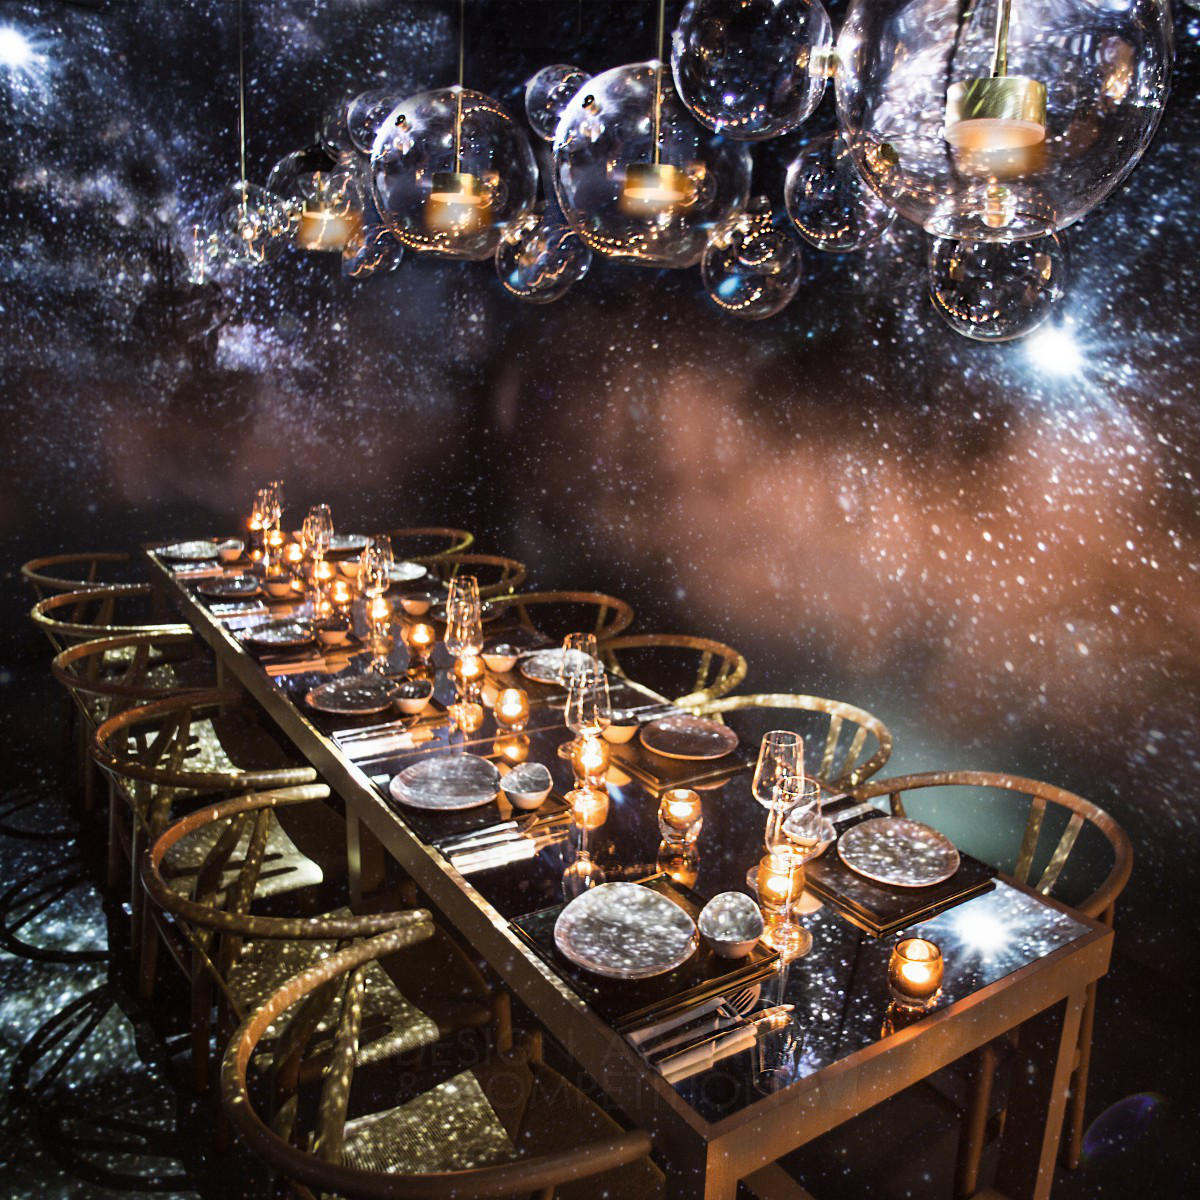 Find Your Lucky Star Restaurant pop-up installation by Emma Maxwell